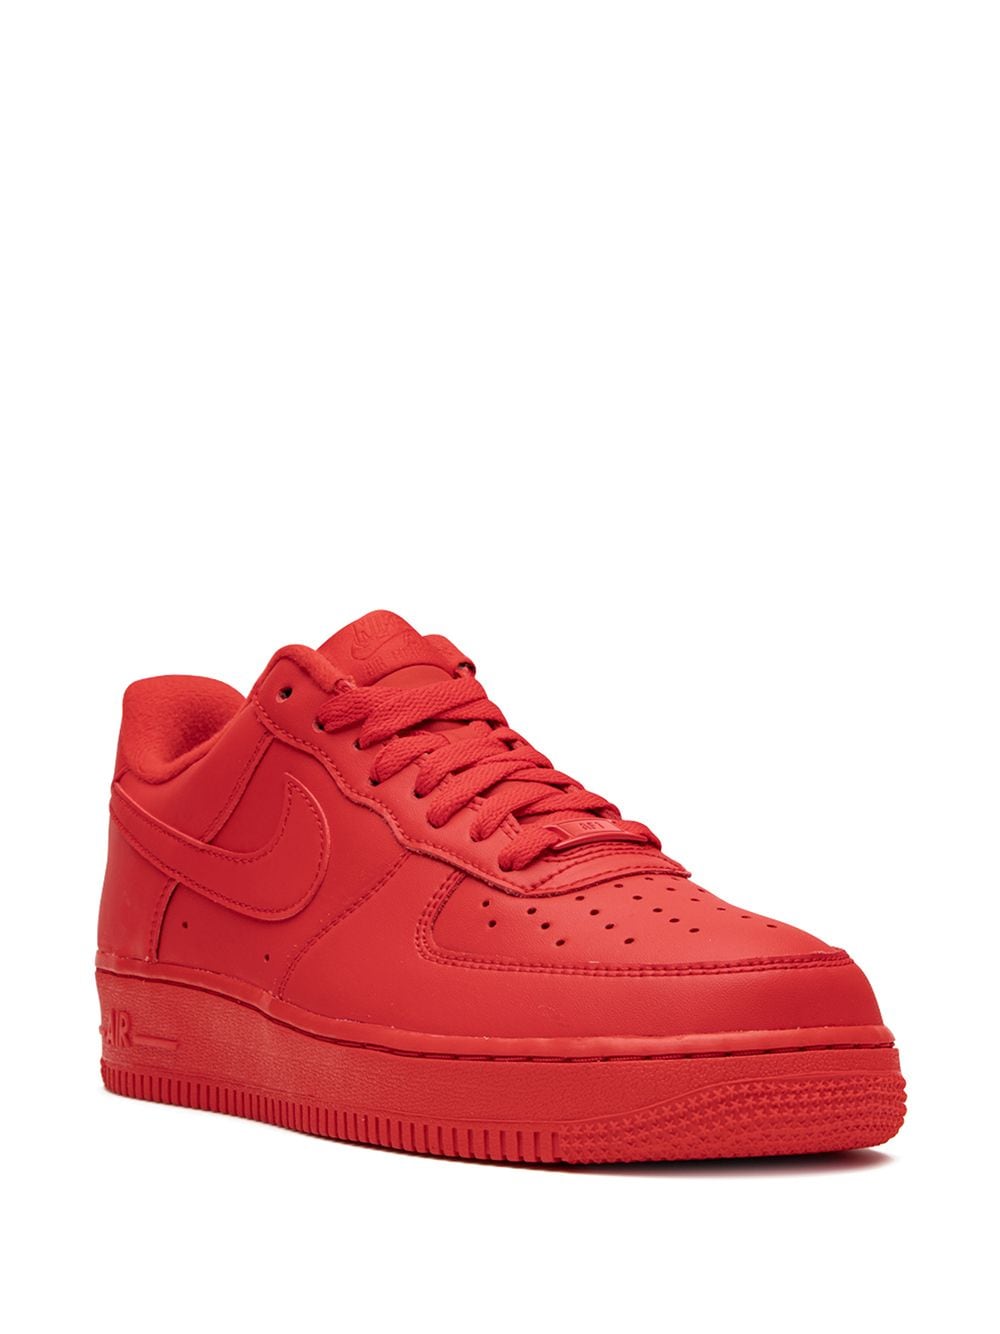 Airforce 1 '07 triple Red